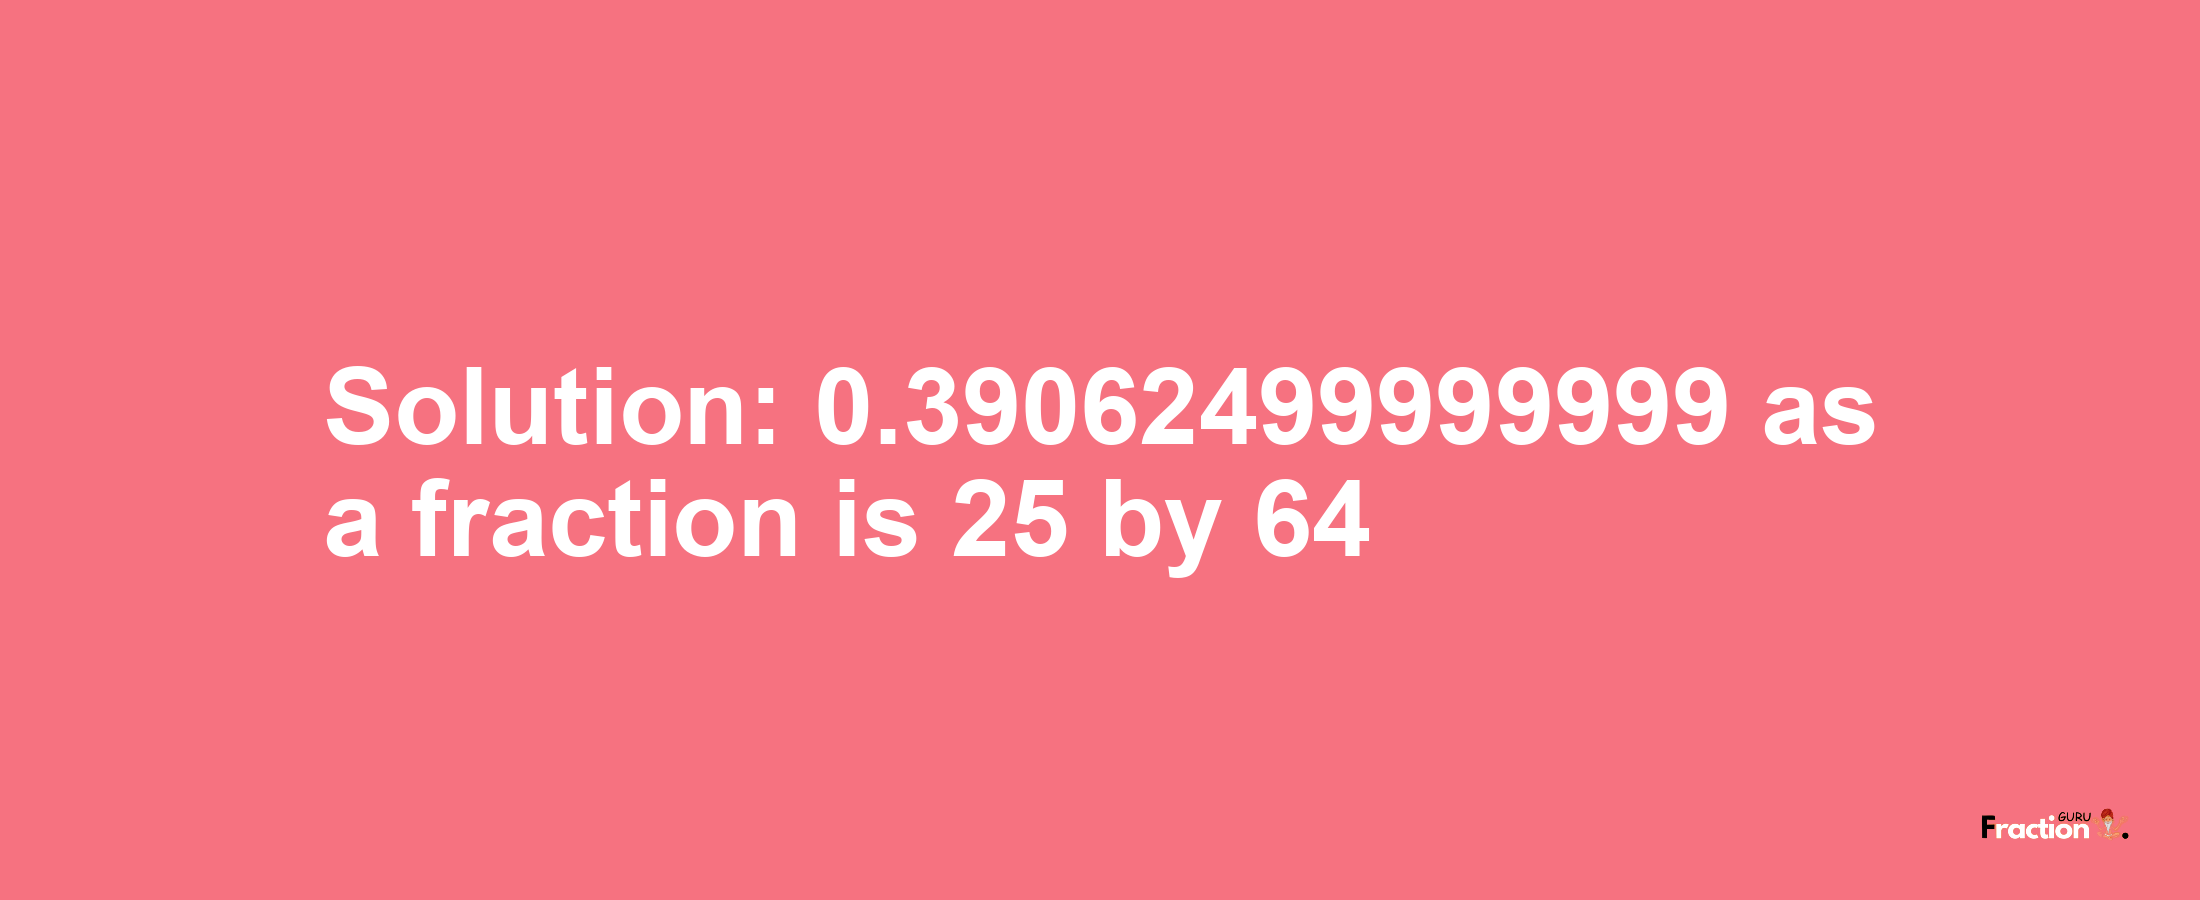 Solution:0.39062499999999 as a fraction is 25/64